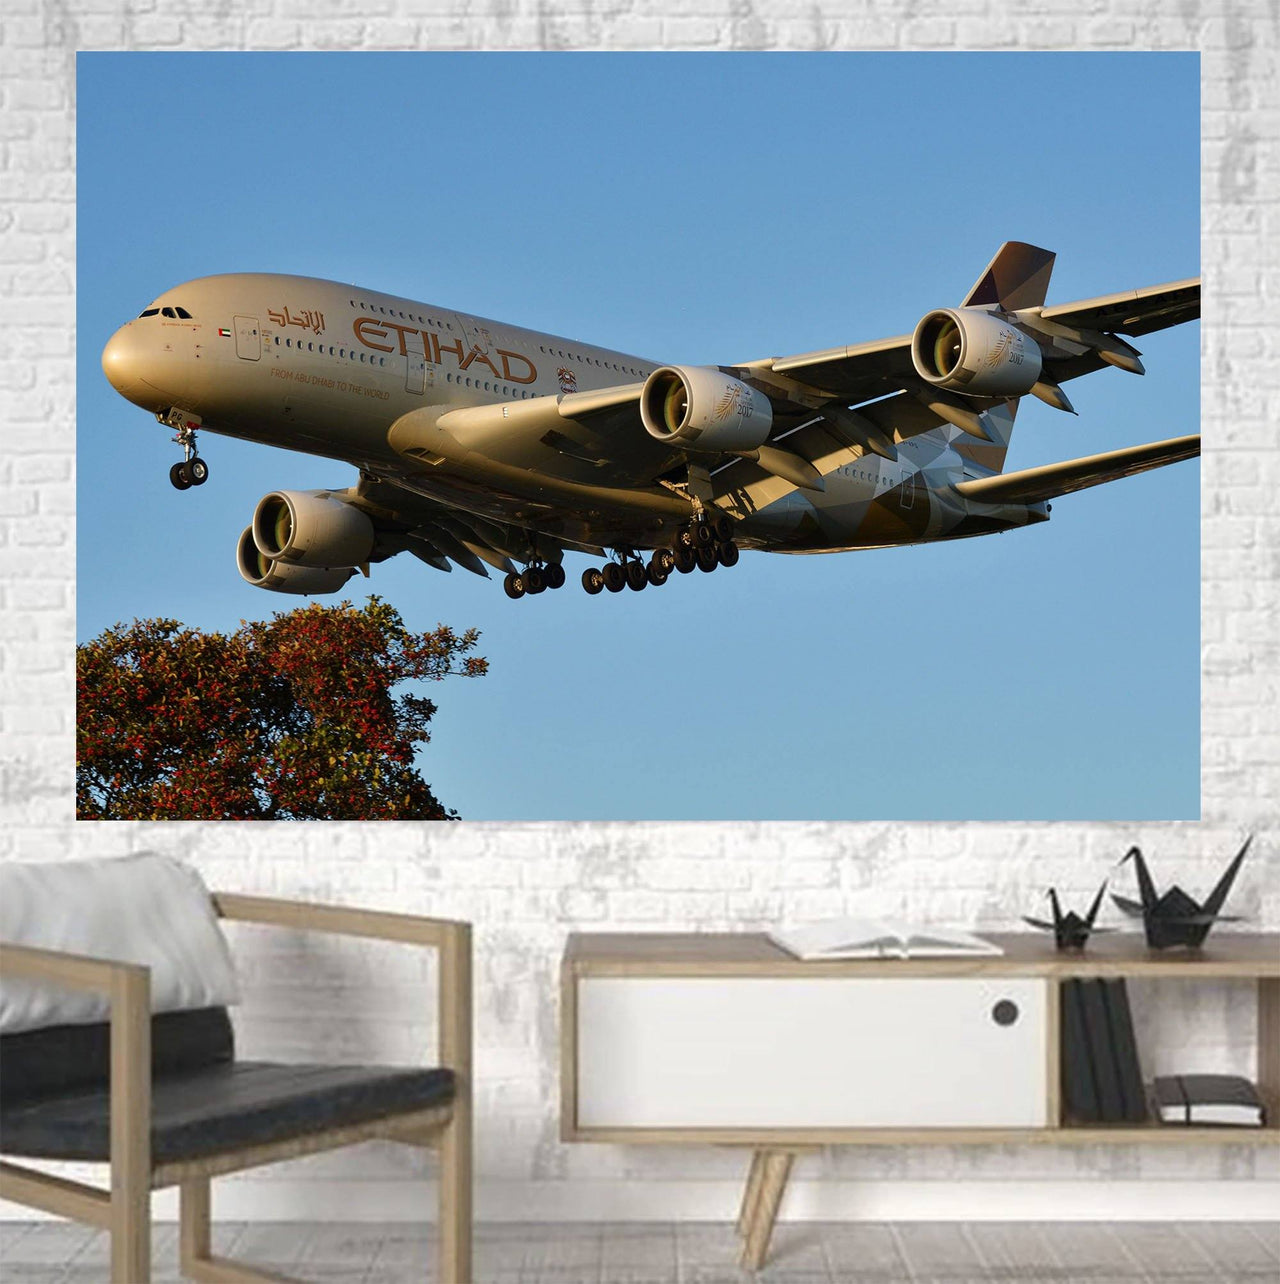 Etihad Airways A380 Printed Canvas Posters (1 Piece) Aviation Shop 